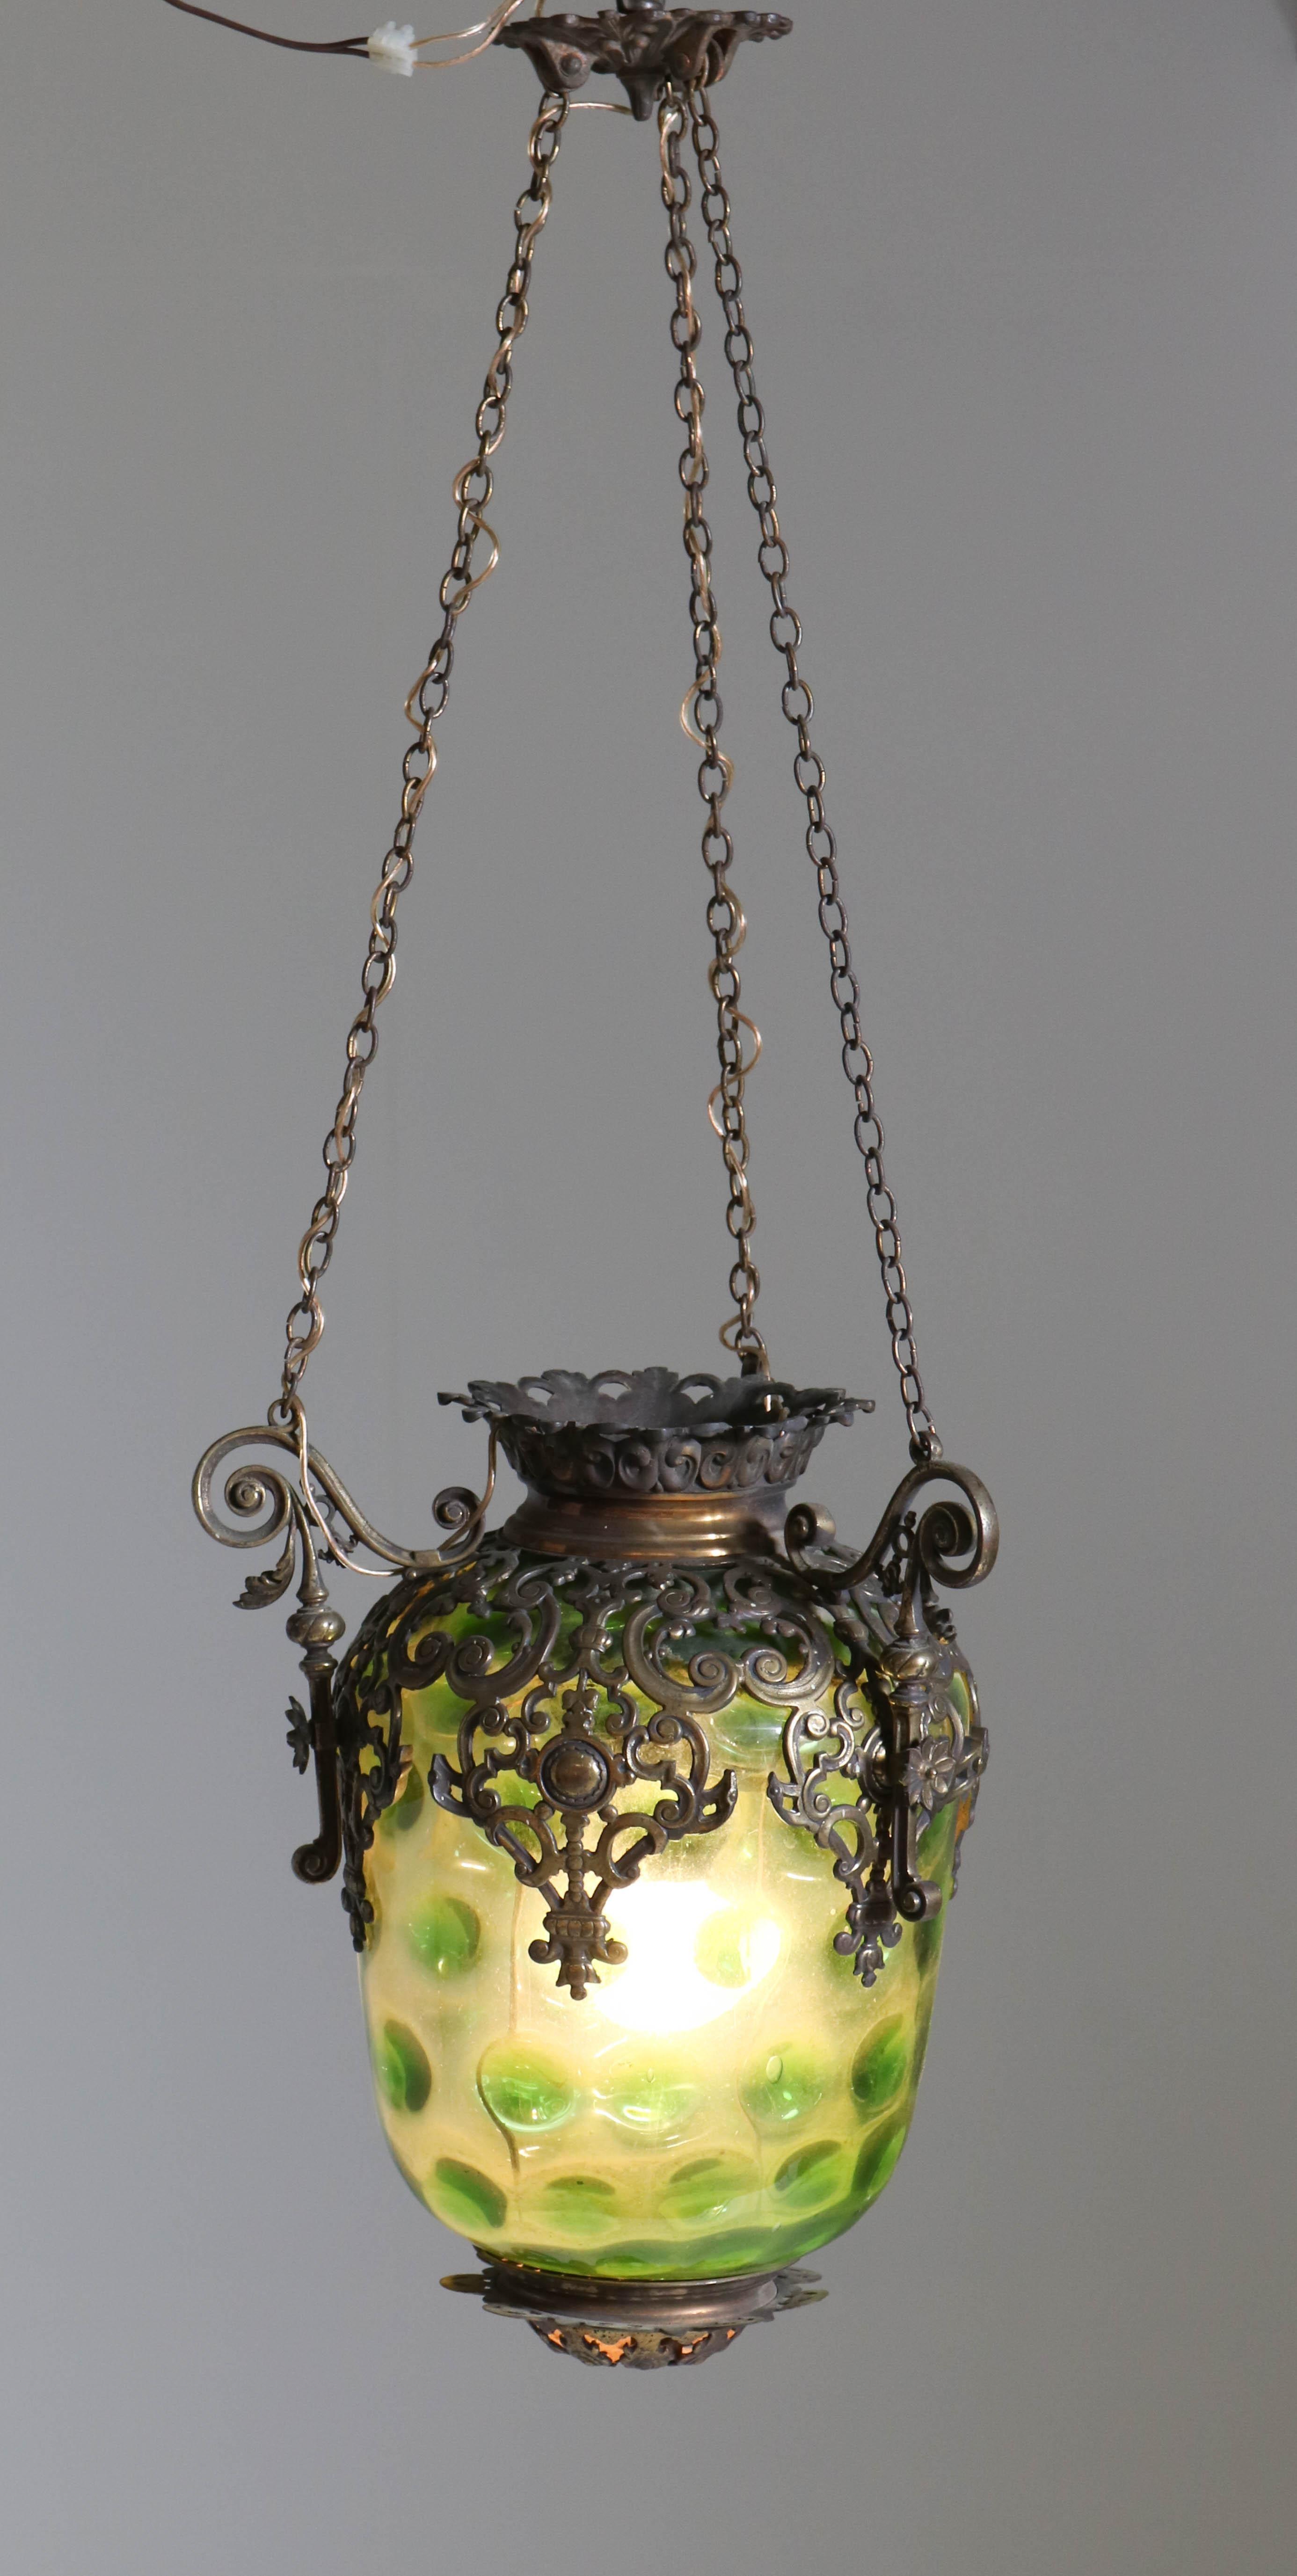 Offered by Amsterdam Modernism:
Wonderful French antique hall lantern.
Brass frame and chains with original green glass shade.
In good original condition with minor wear consistent with age and use,
preserving a beautiful patina.